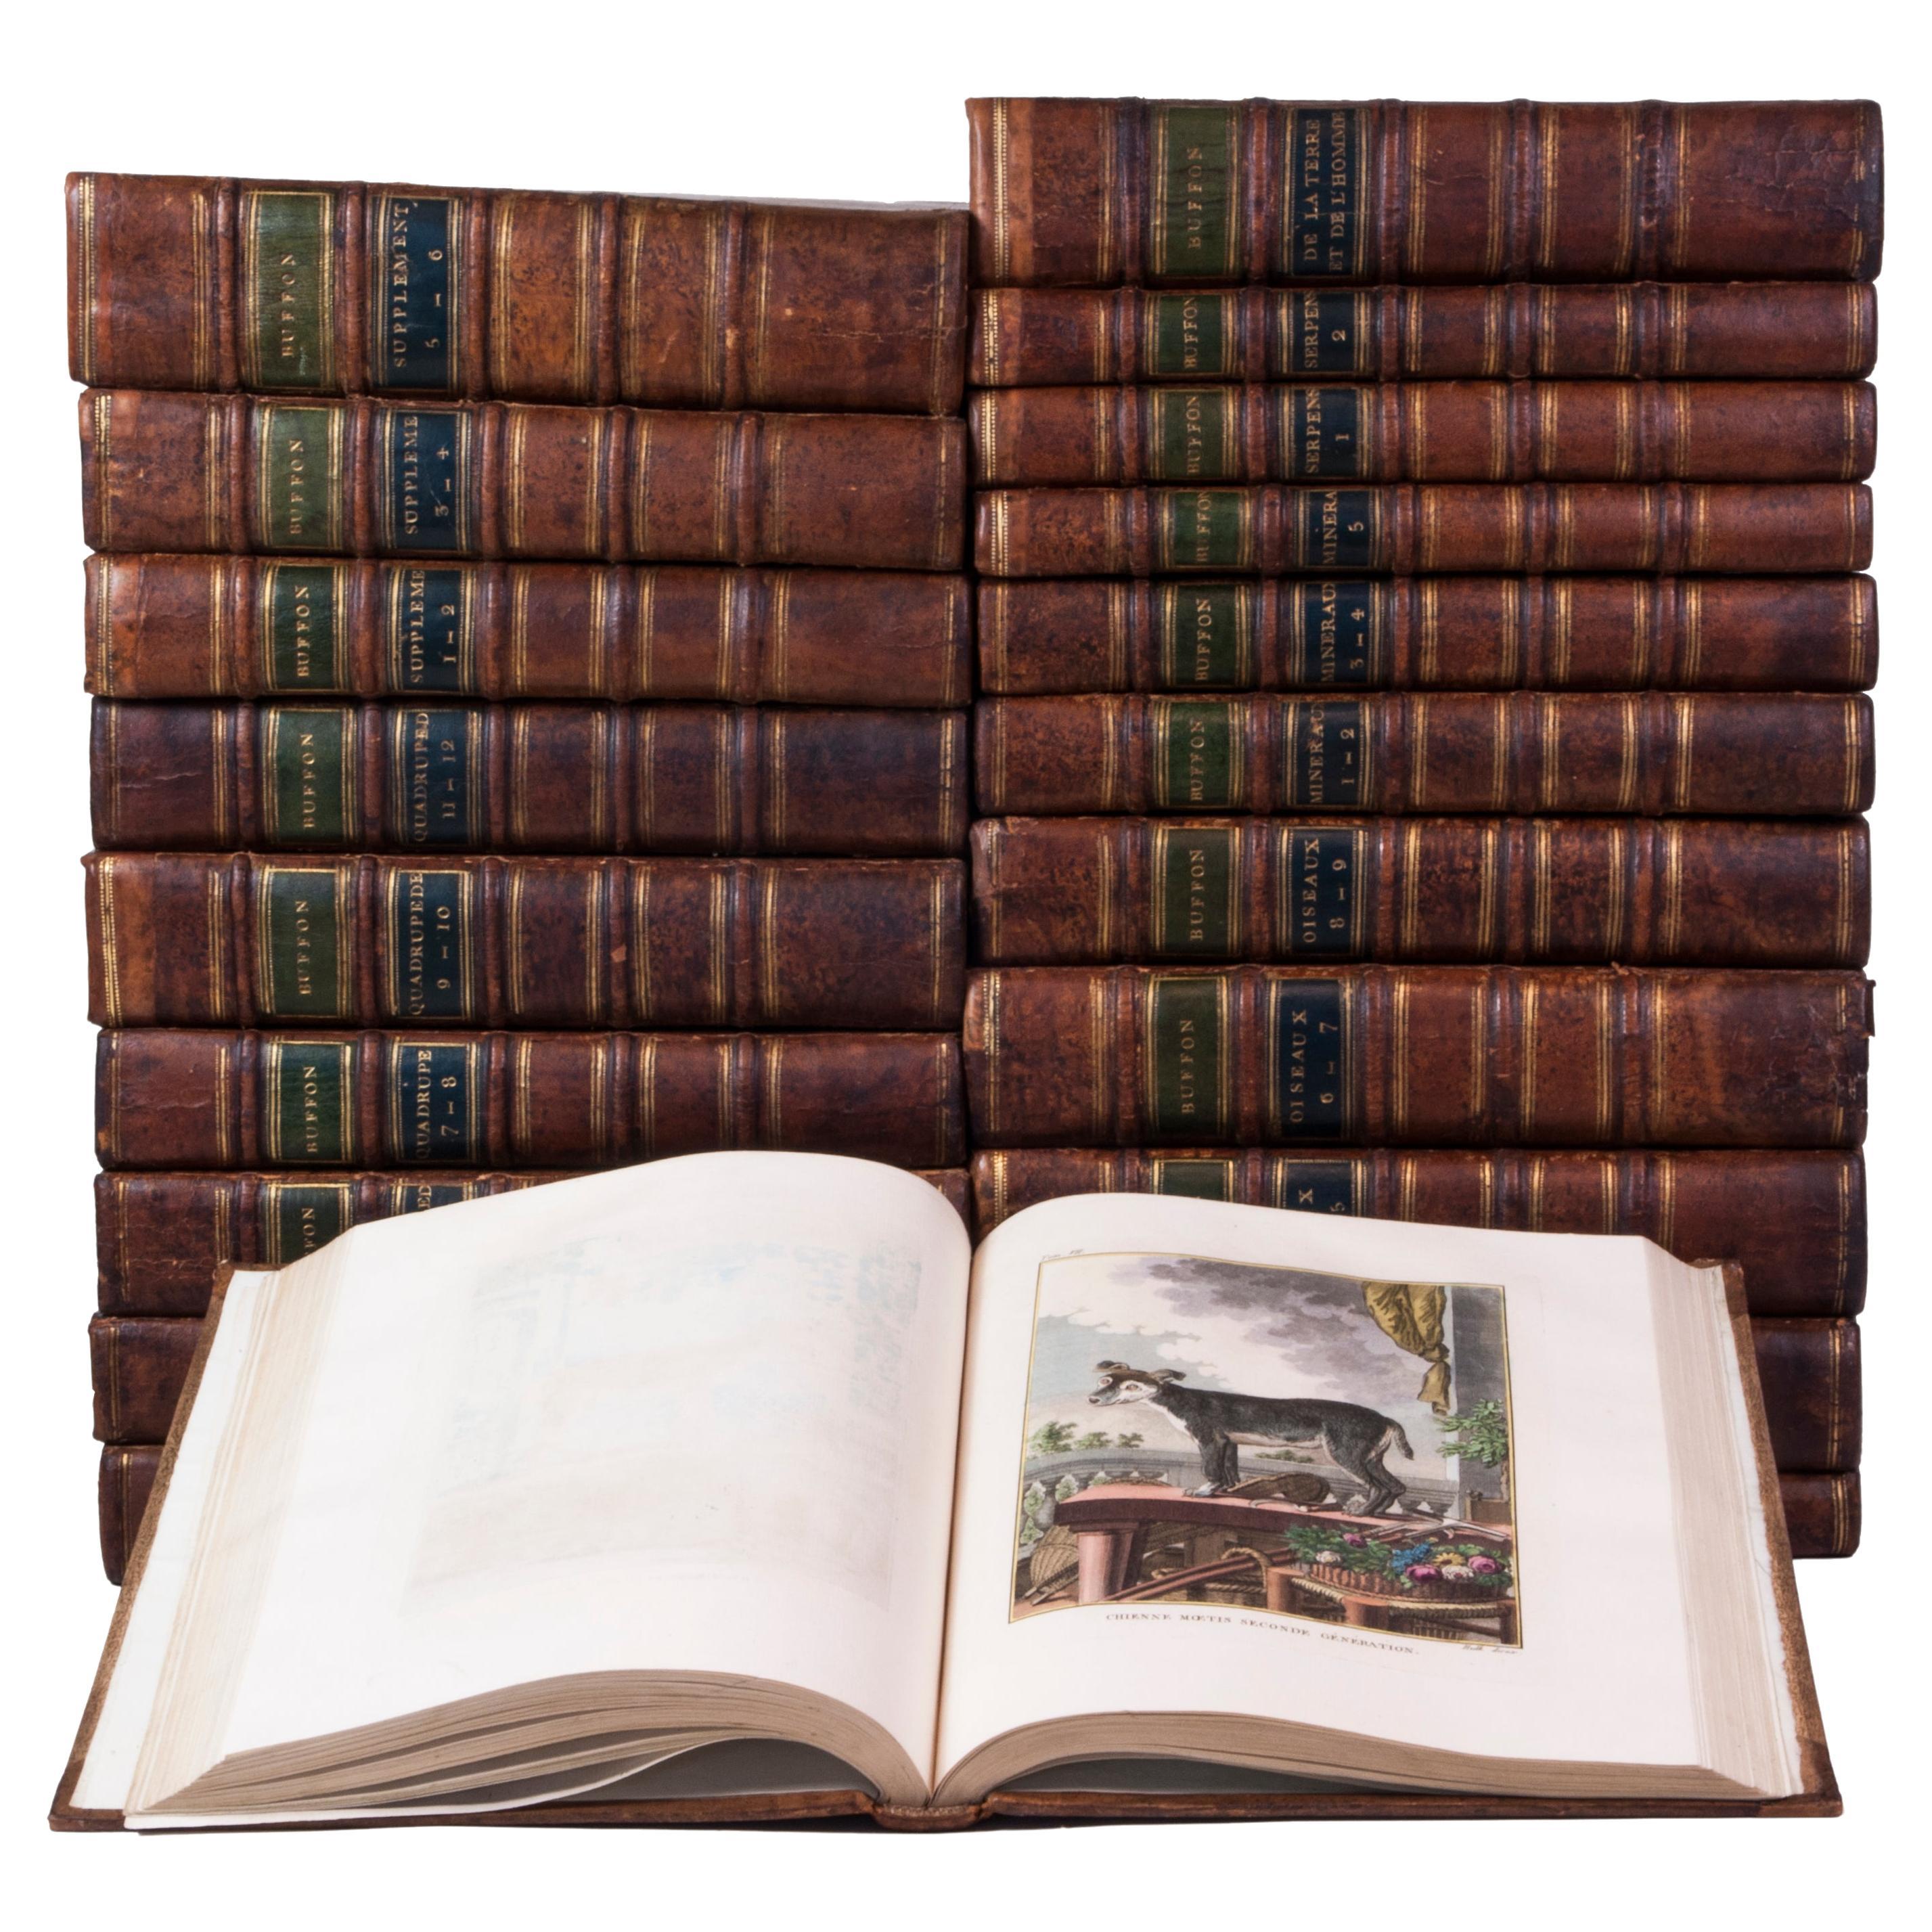 Hand-coloured set of Buffon’s Histoire naturelle in its most luxurious form